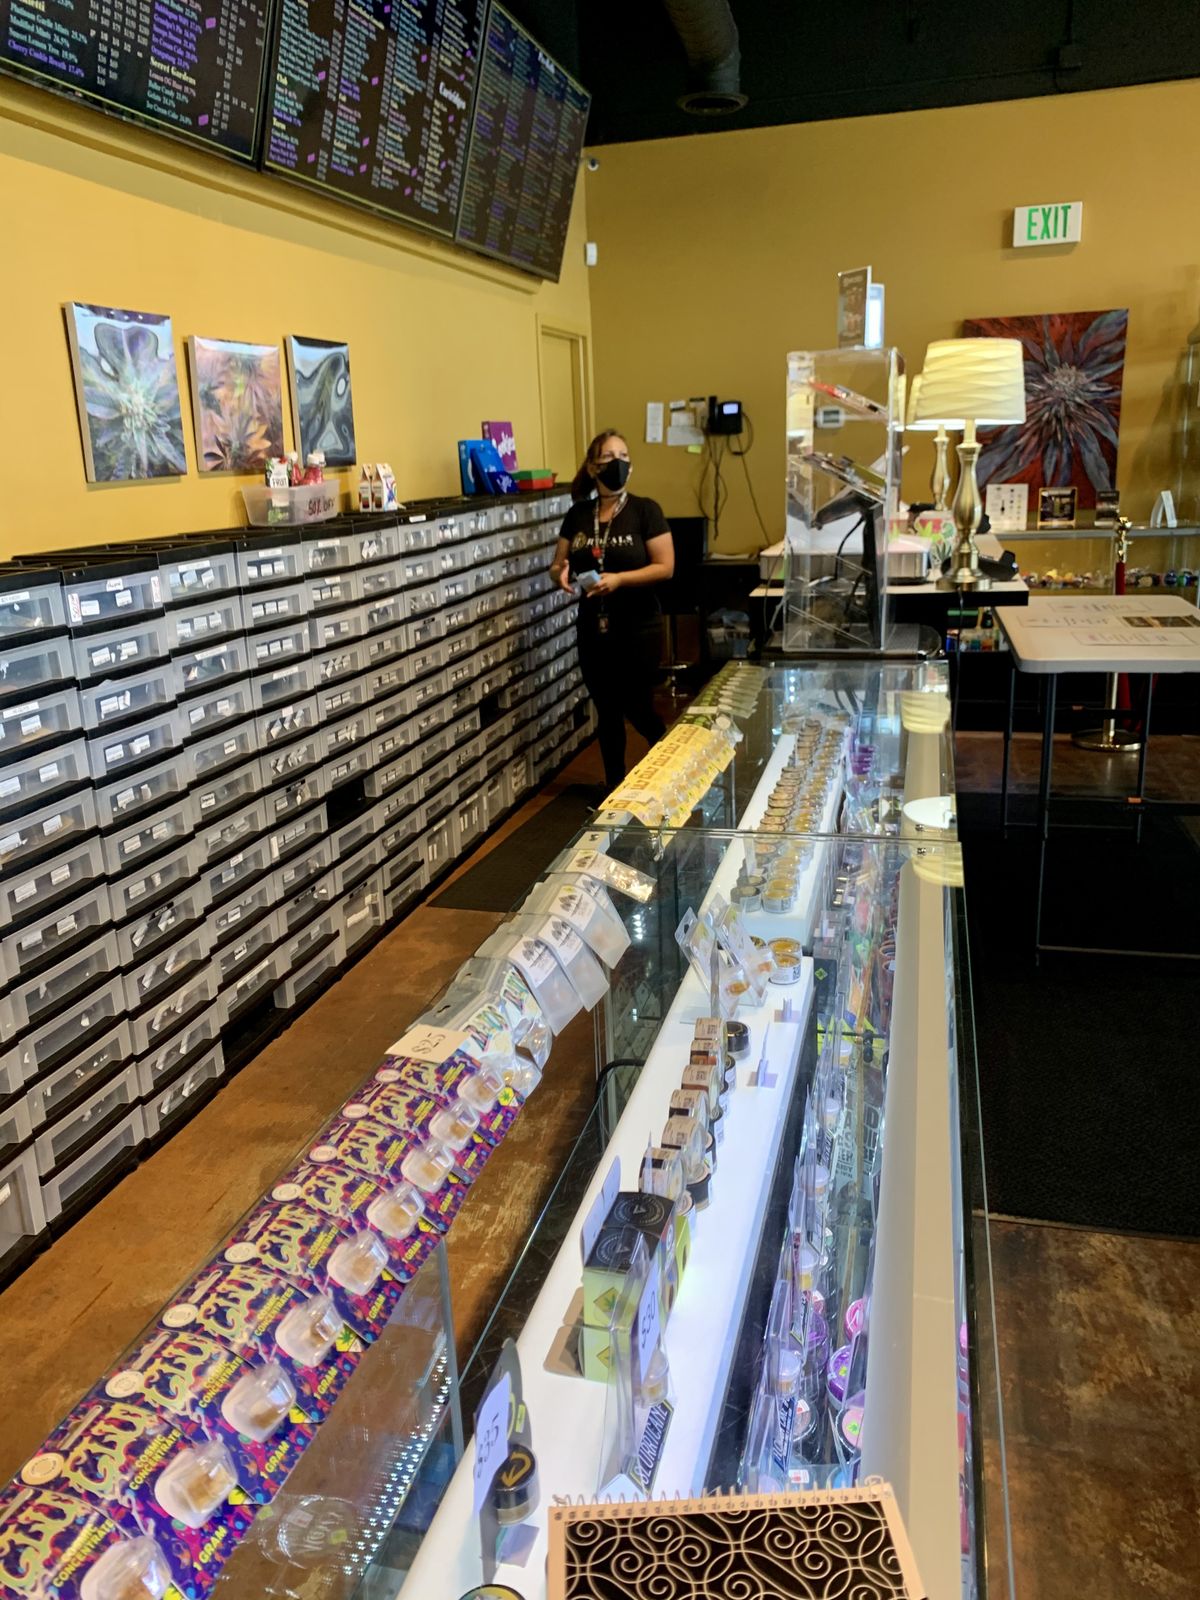 Royals Cannabis offers shoppers a variety of flower, concentrates, edibles and more. (Linda Ball/For Evercannabis)